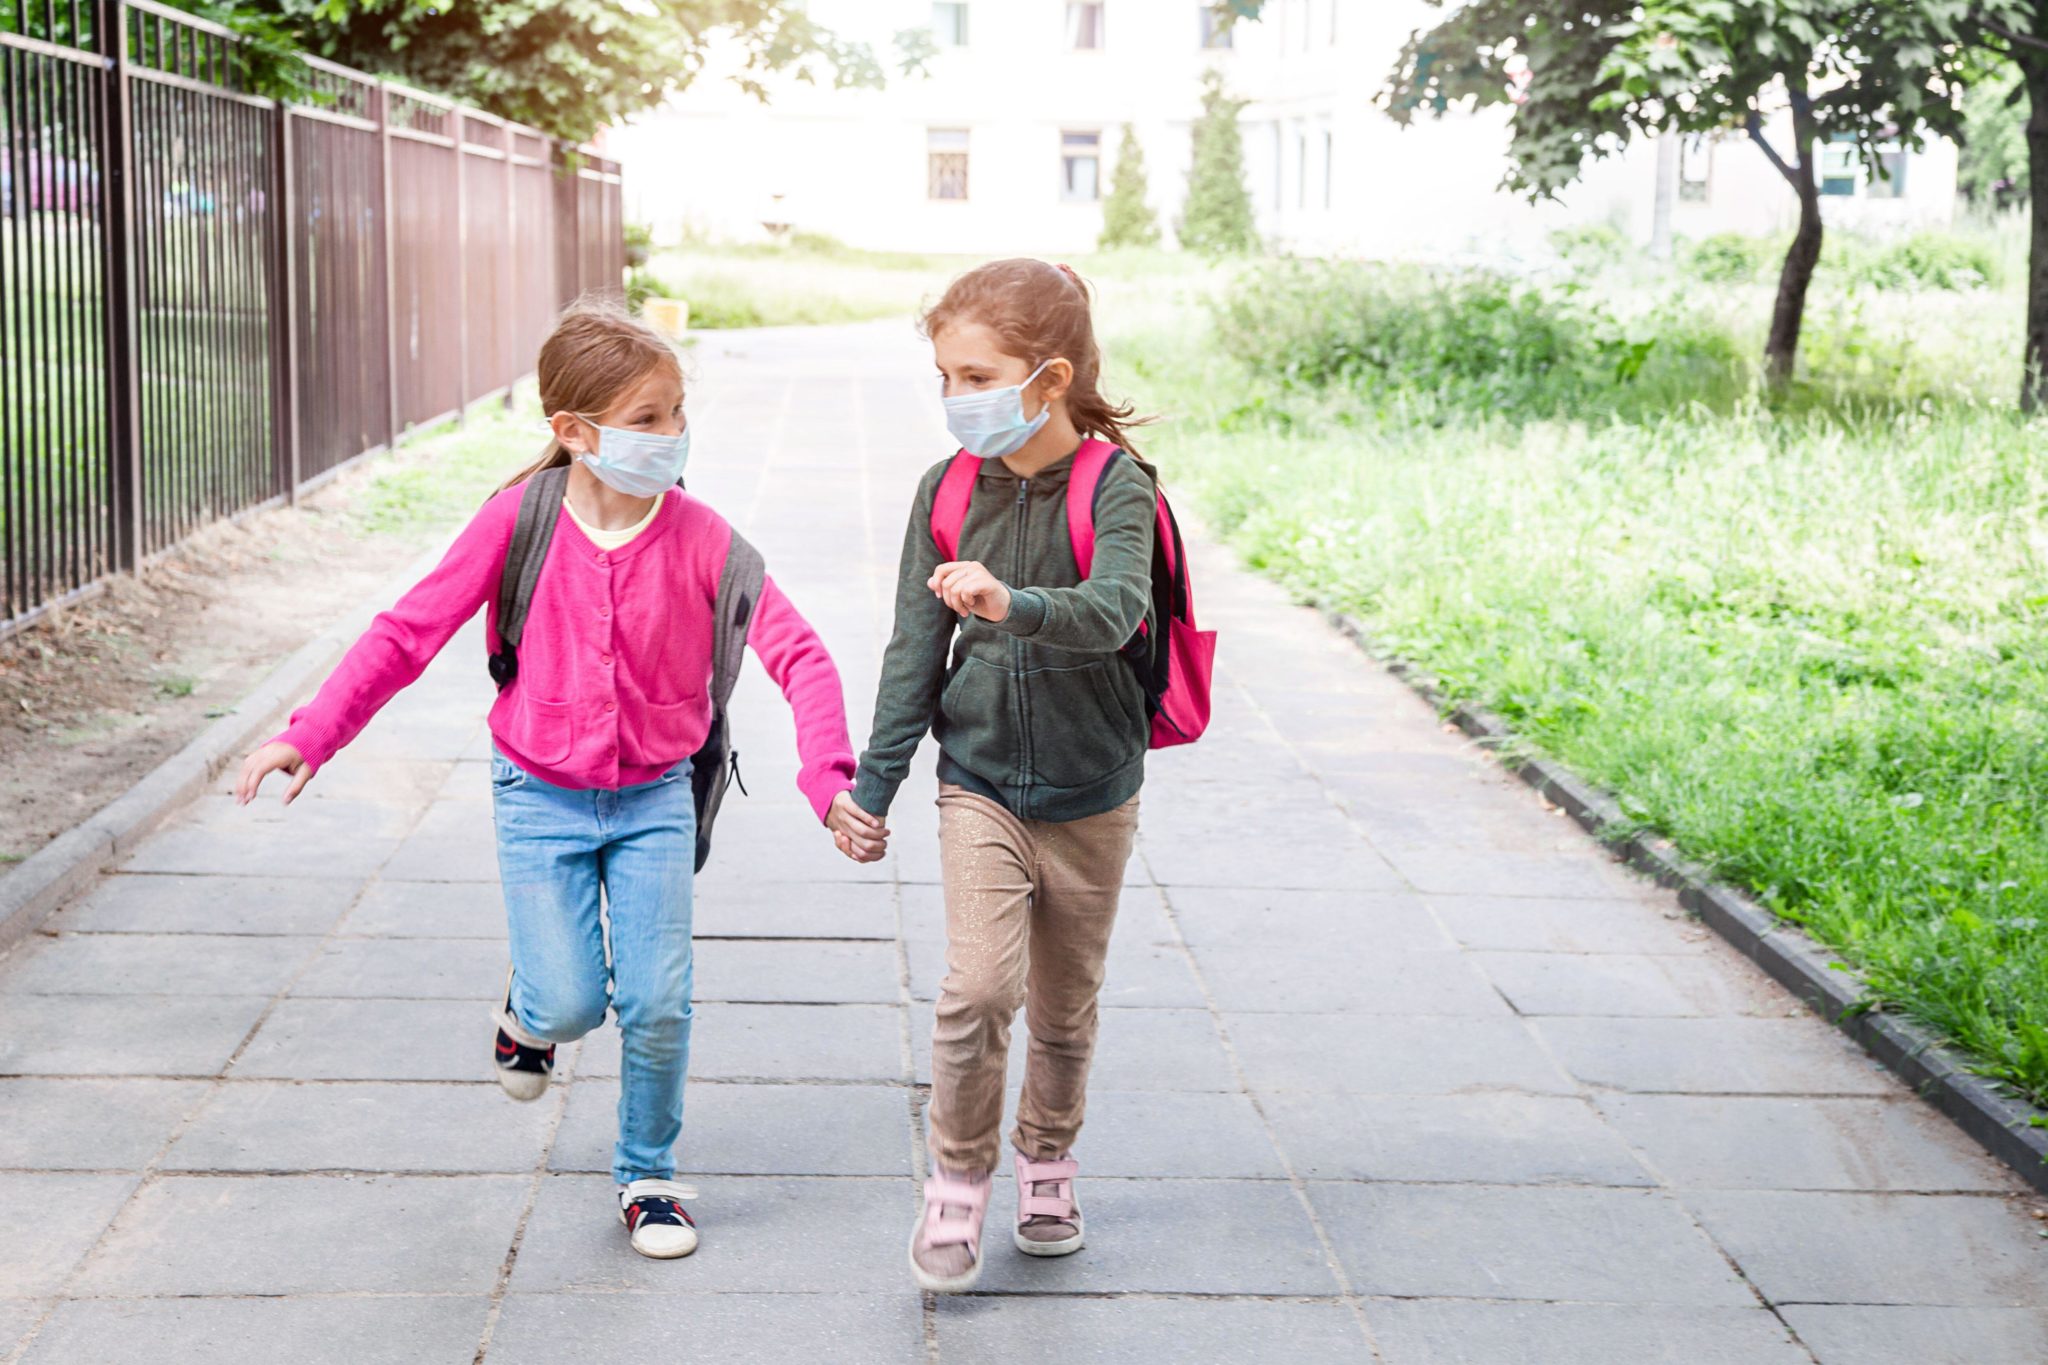 File photo shows two girls running to school wearing protective face masks